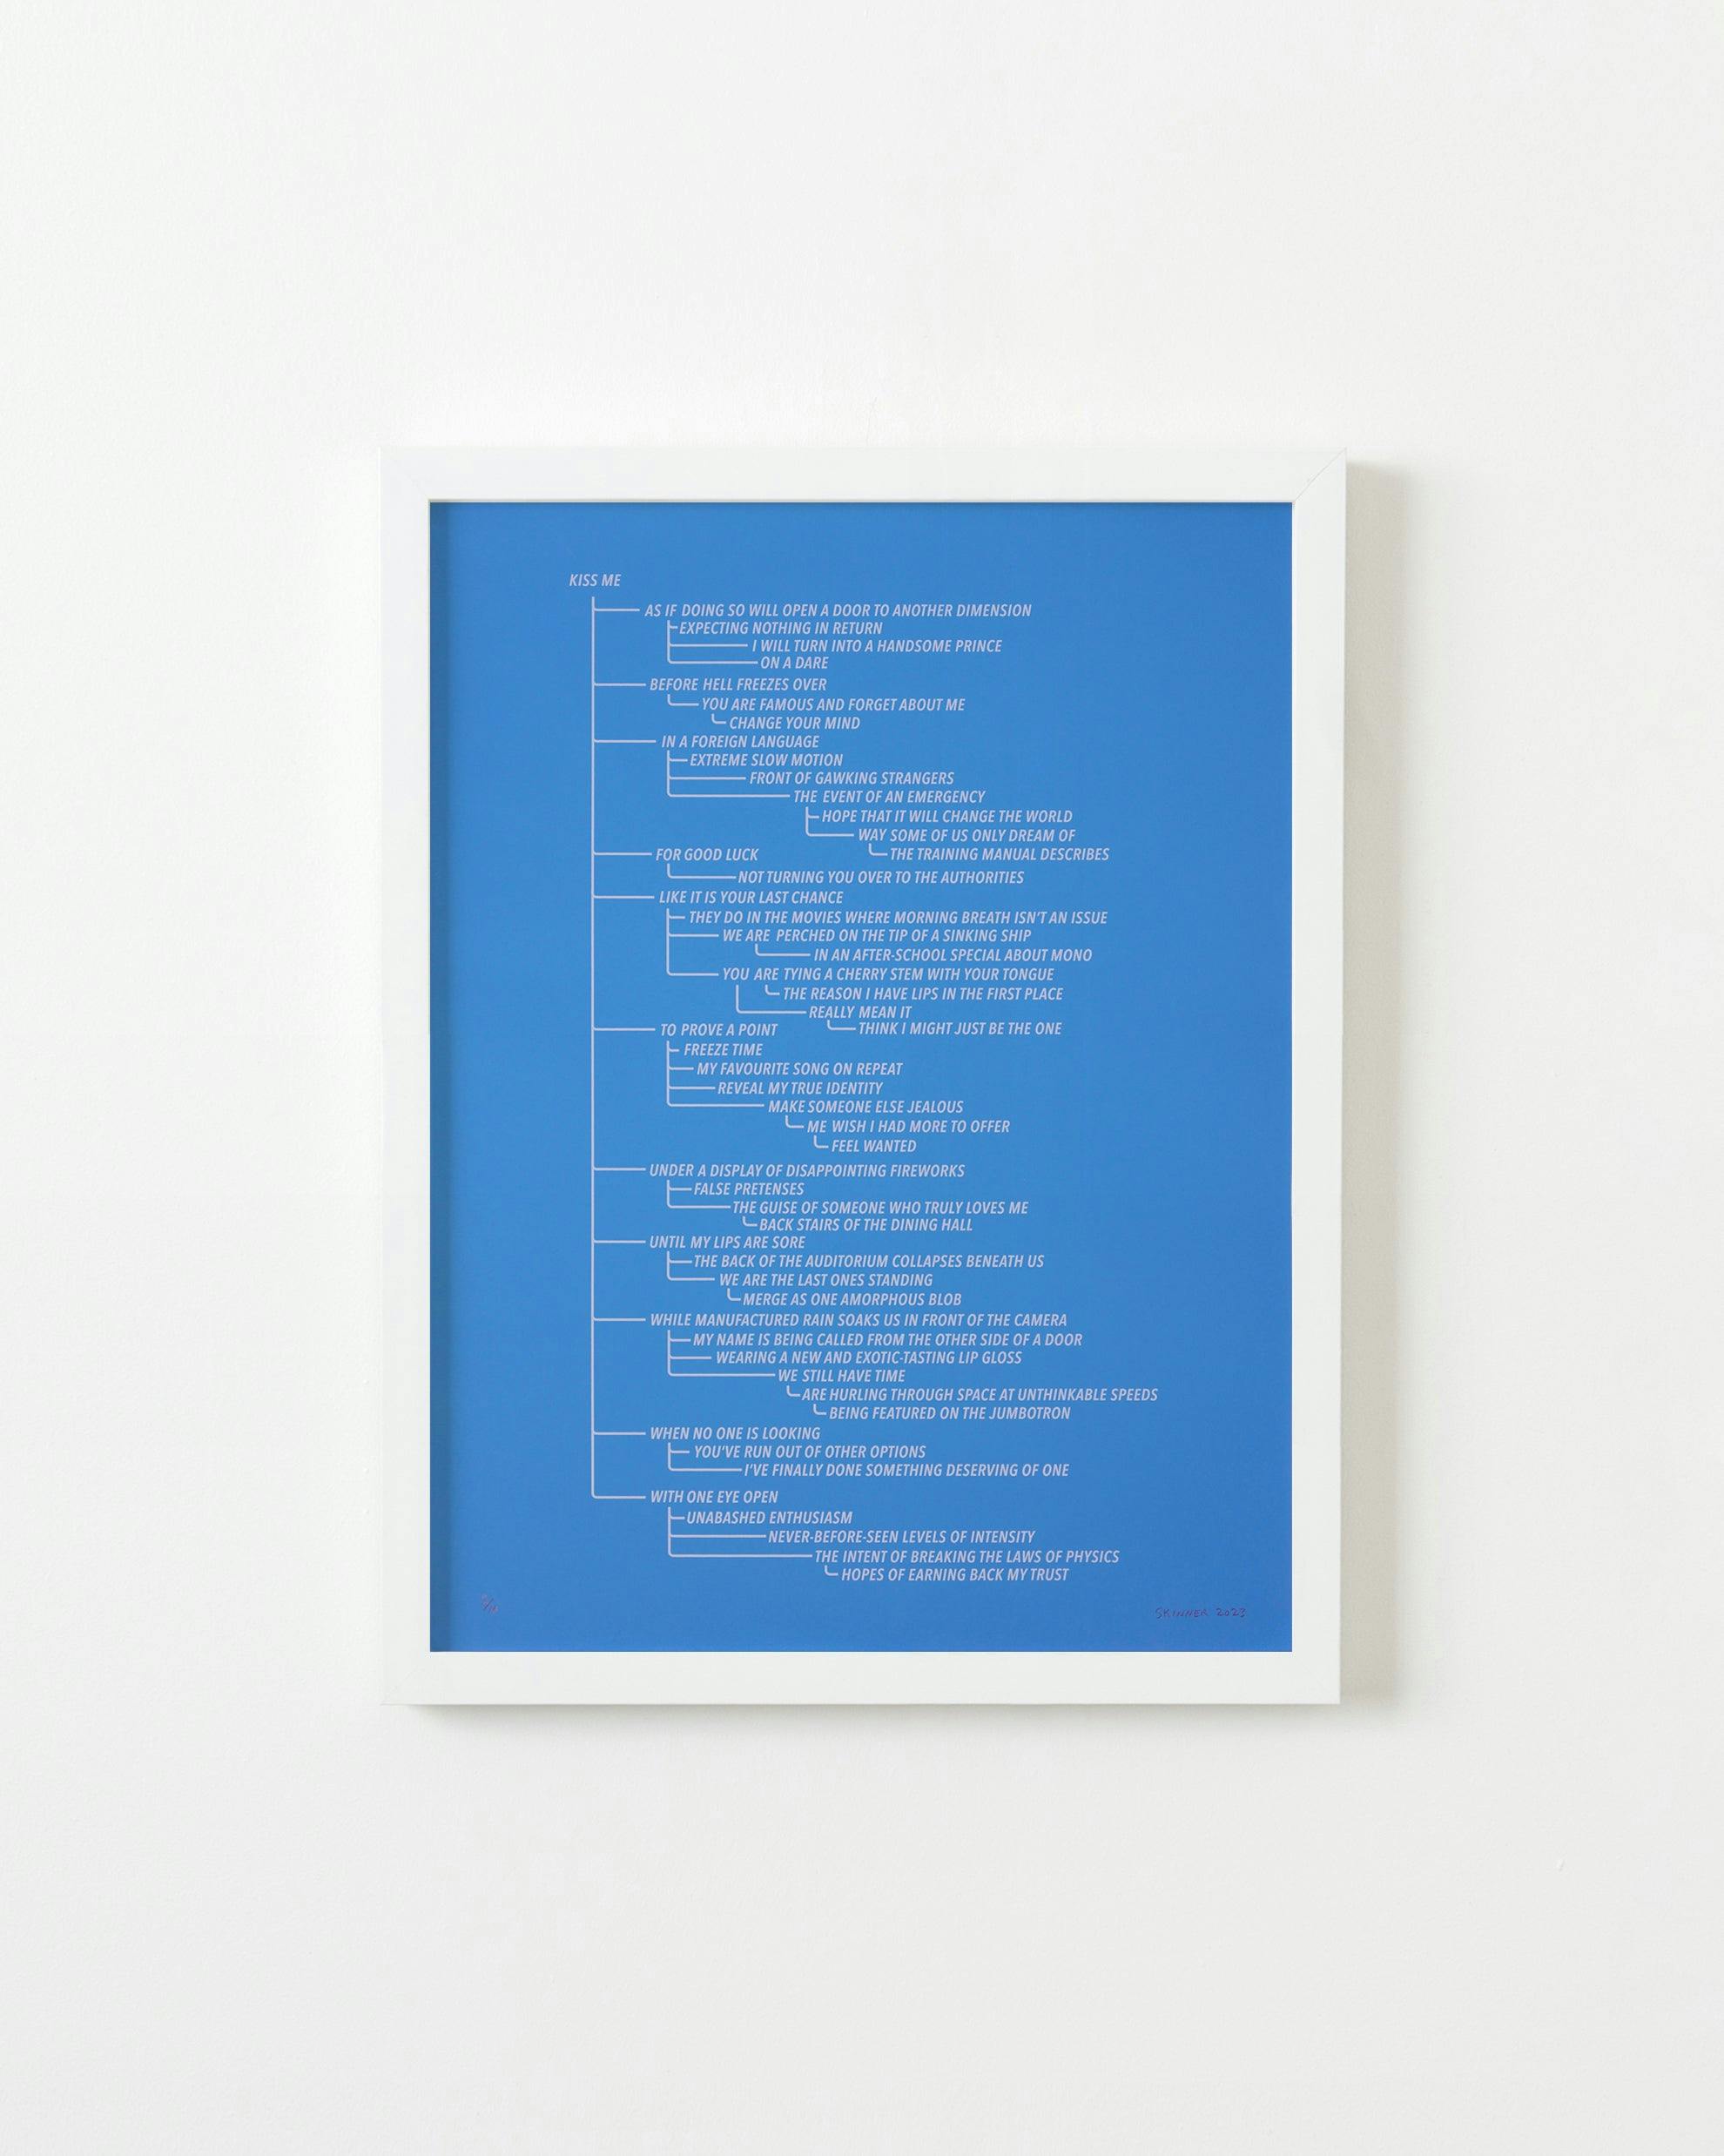 Print by Ben Skinner titled "Blue 3. From the Kiss Me Flow Chart (Blue Series)".